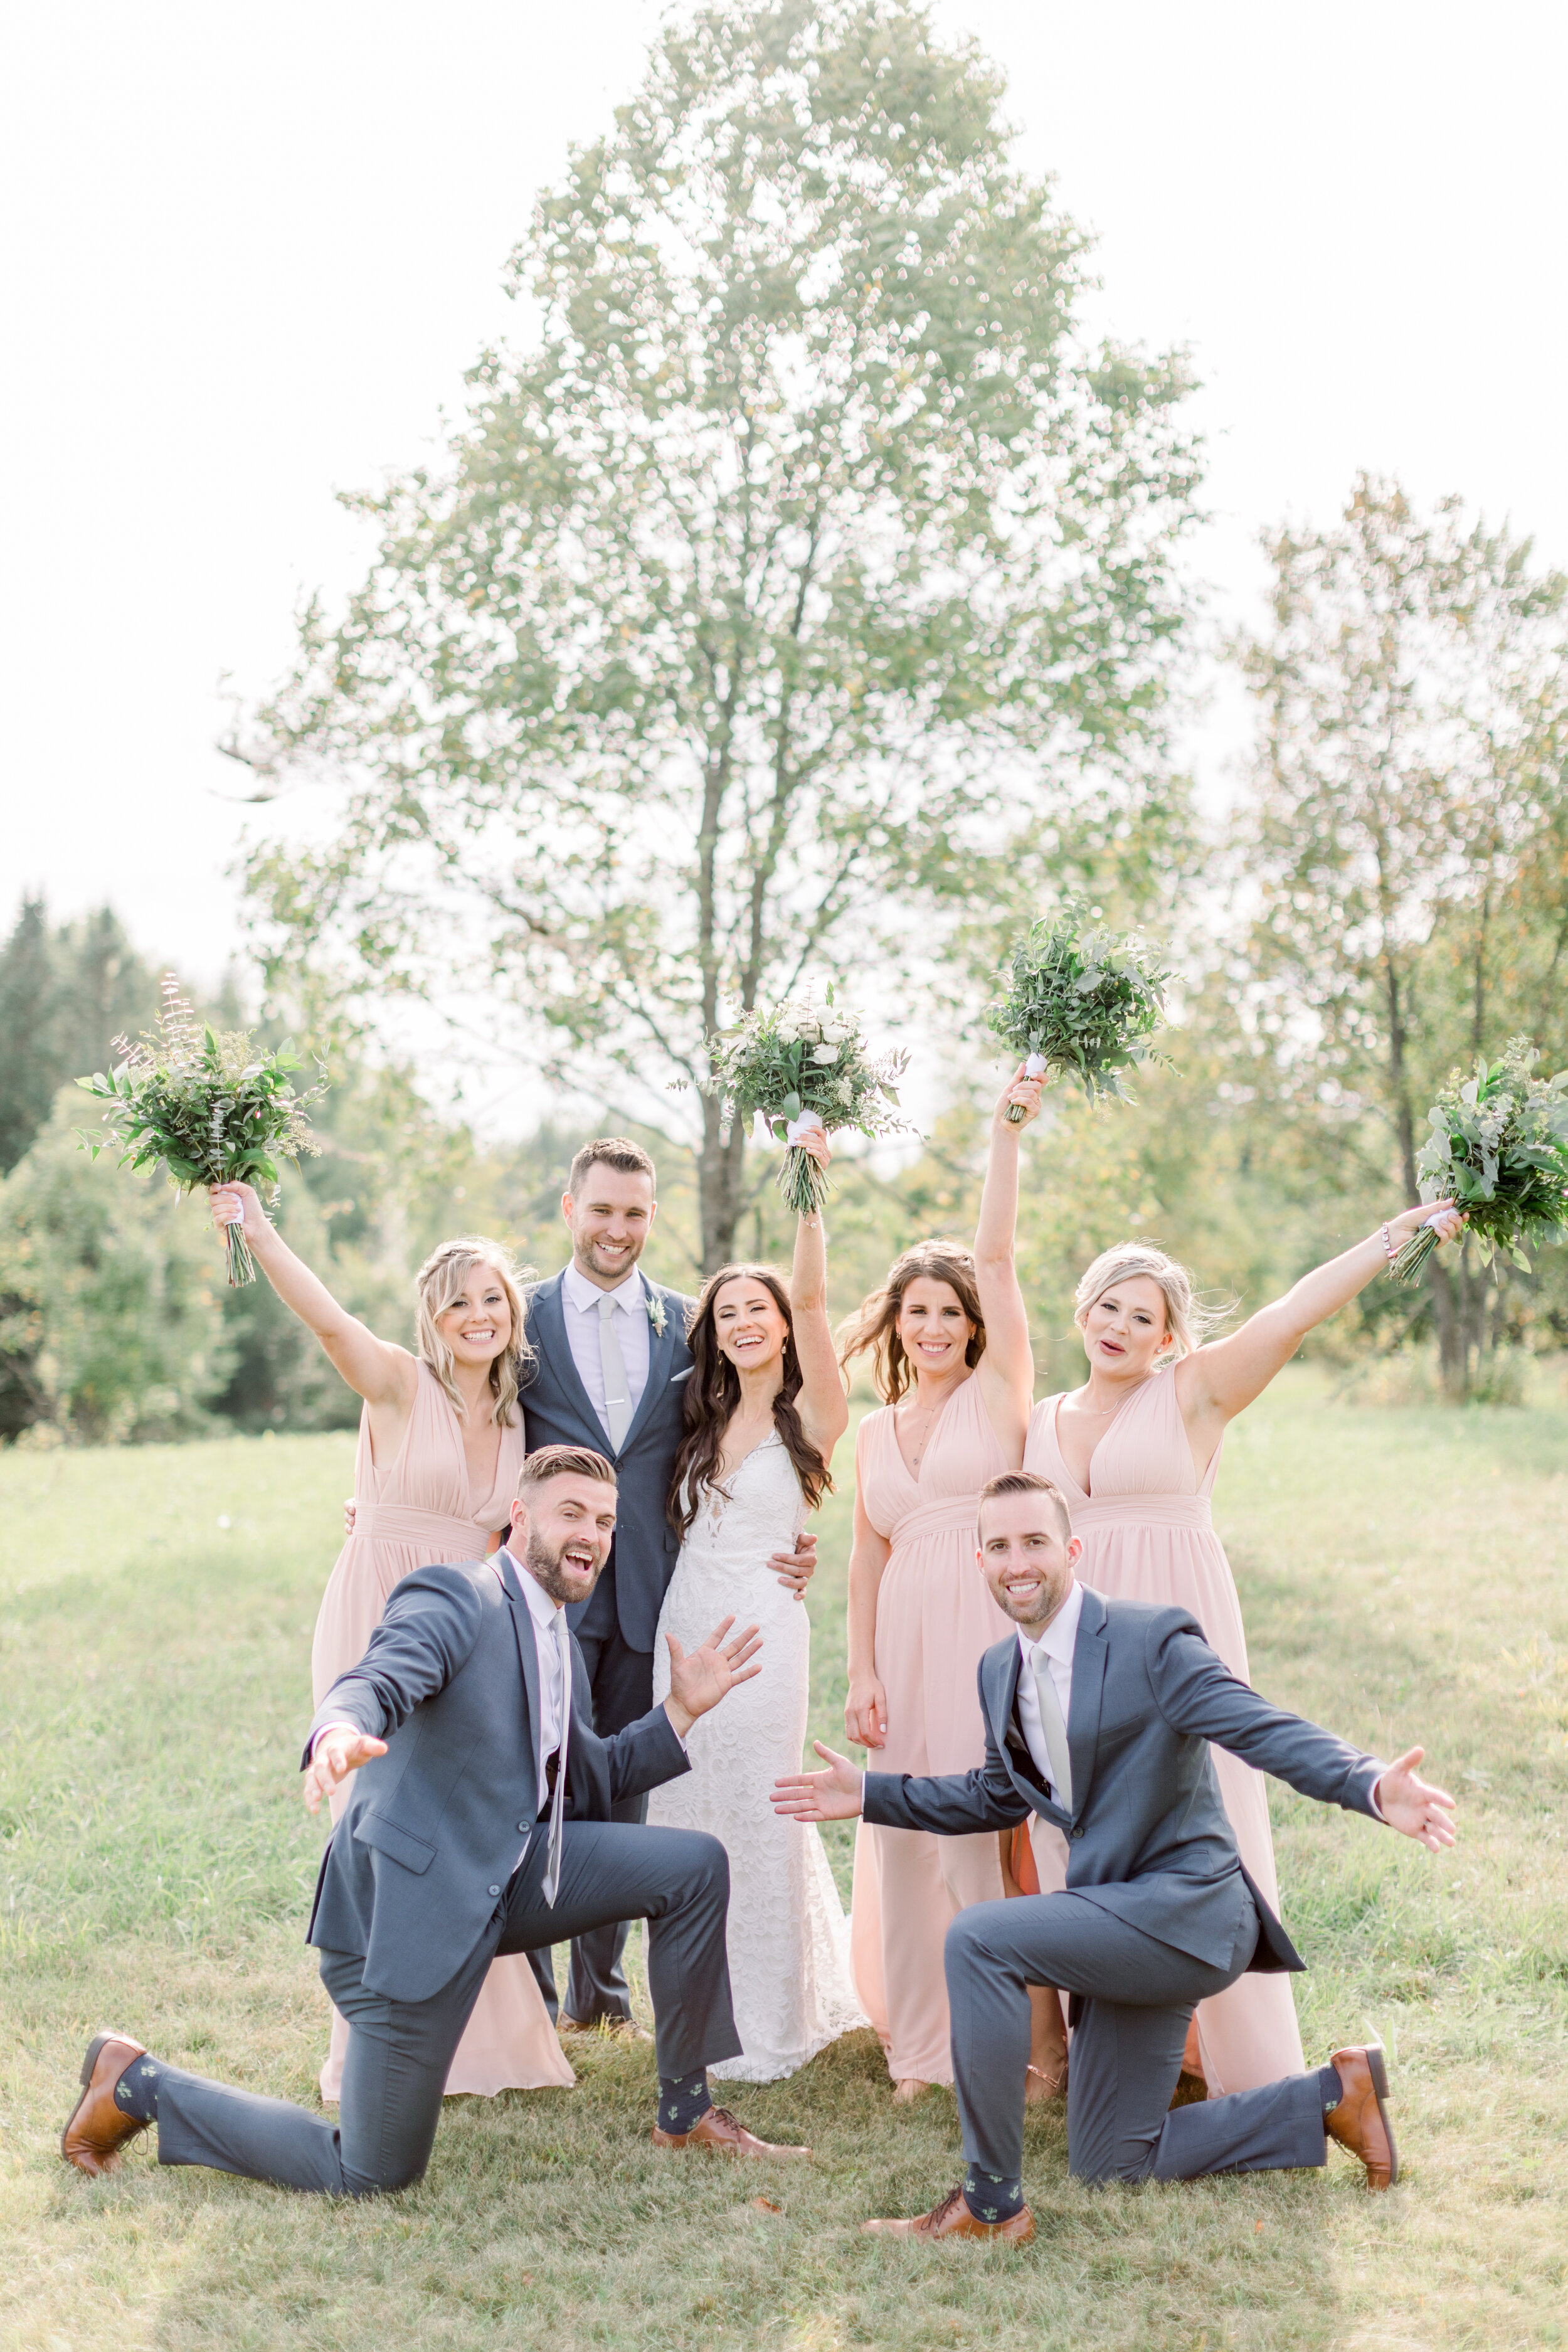  This picture features a fun wedding party celebrating the bride and groom on their big day in Kinmount, Ontario with Chelsea Mason Photography. Wedding party groomsmen bridesmaids light pink dress gray suit wedding attire ontario wedding photographe